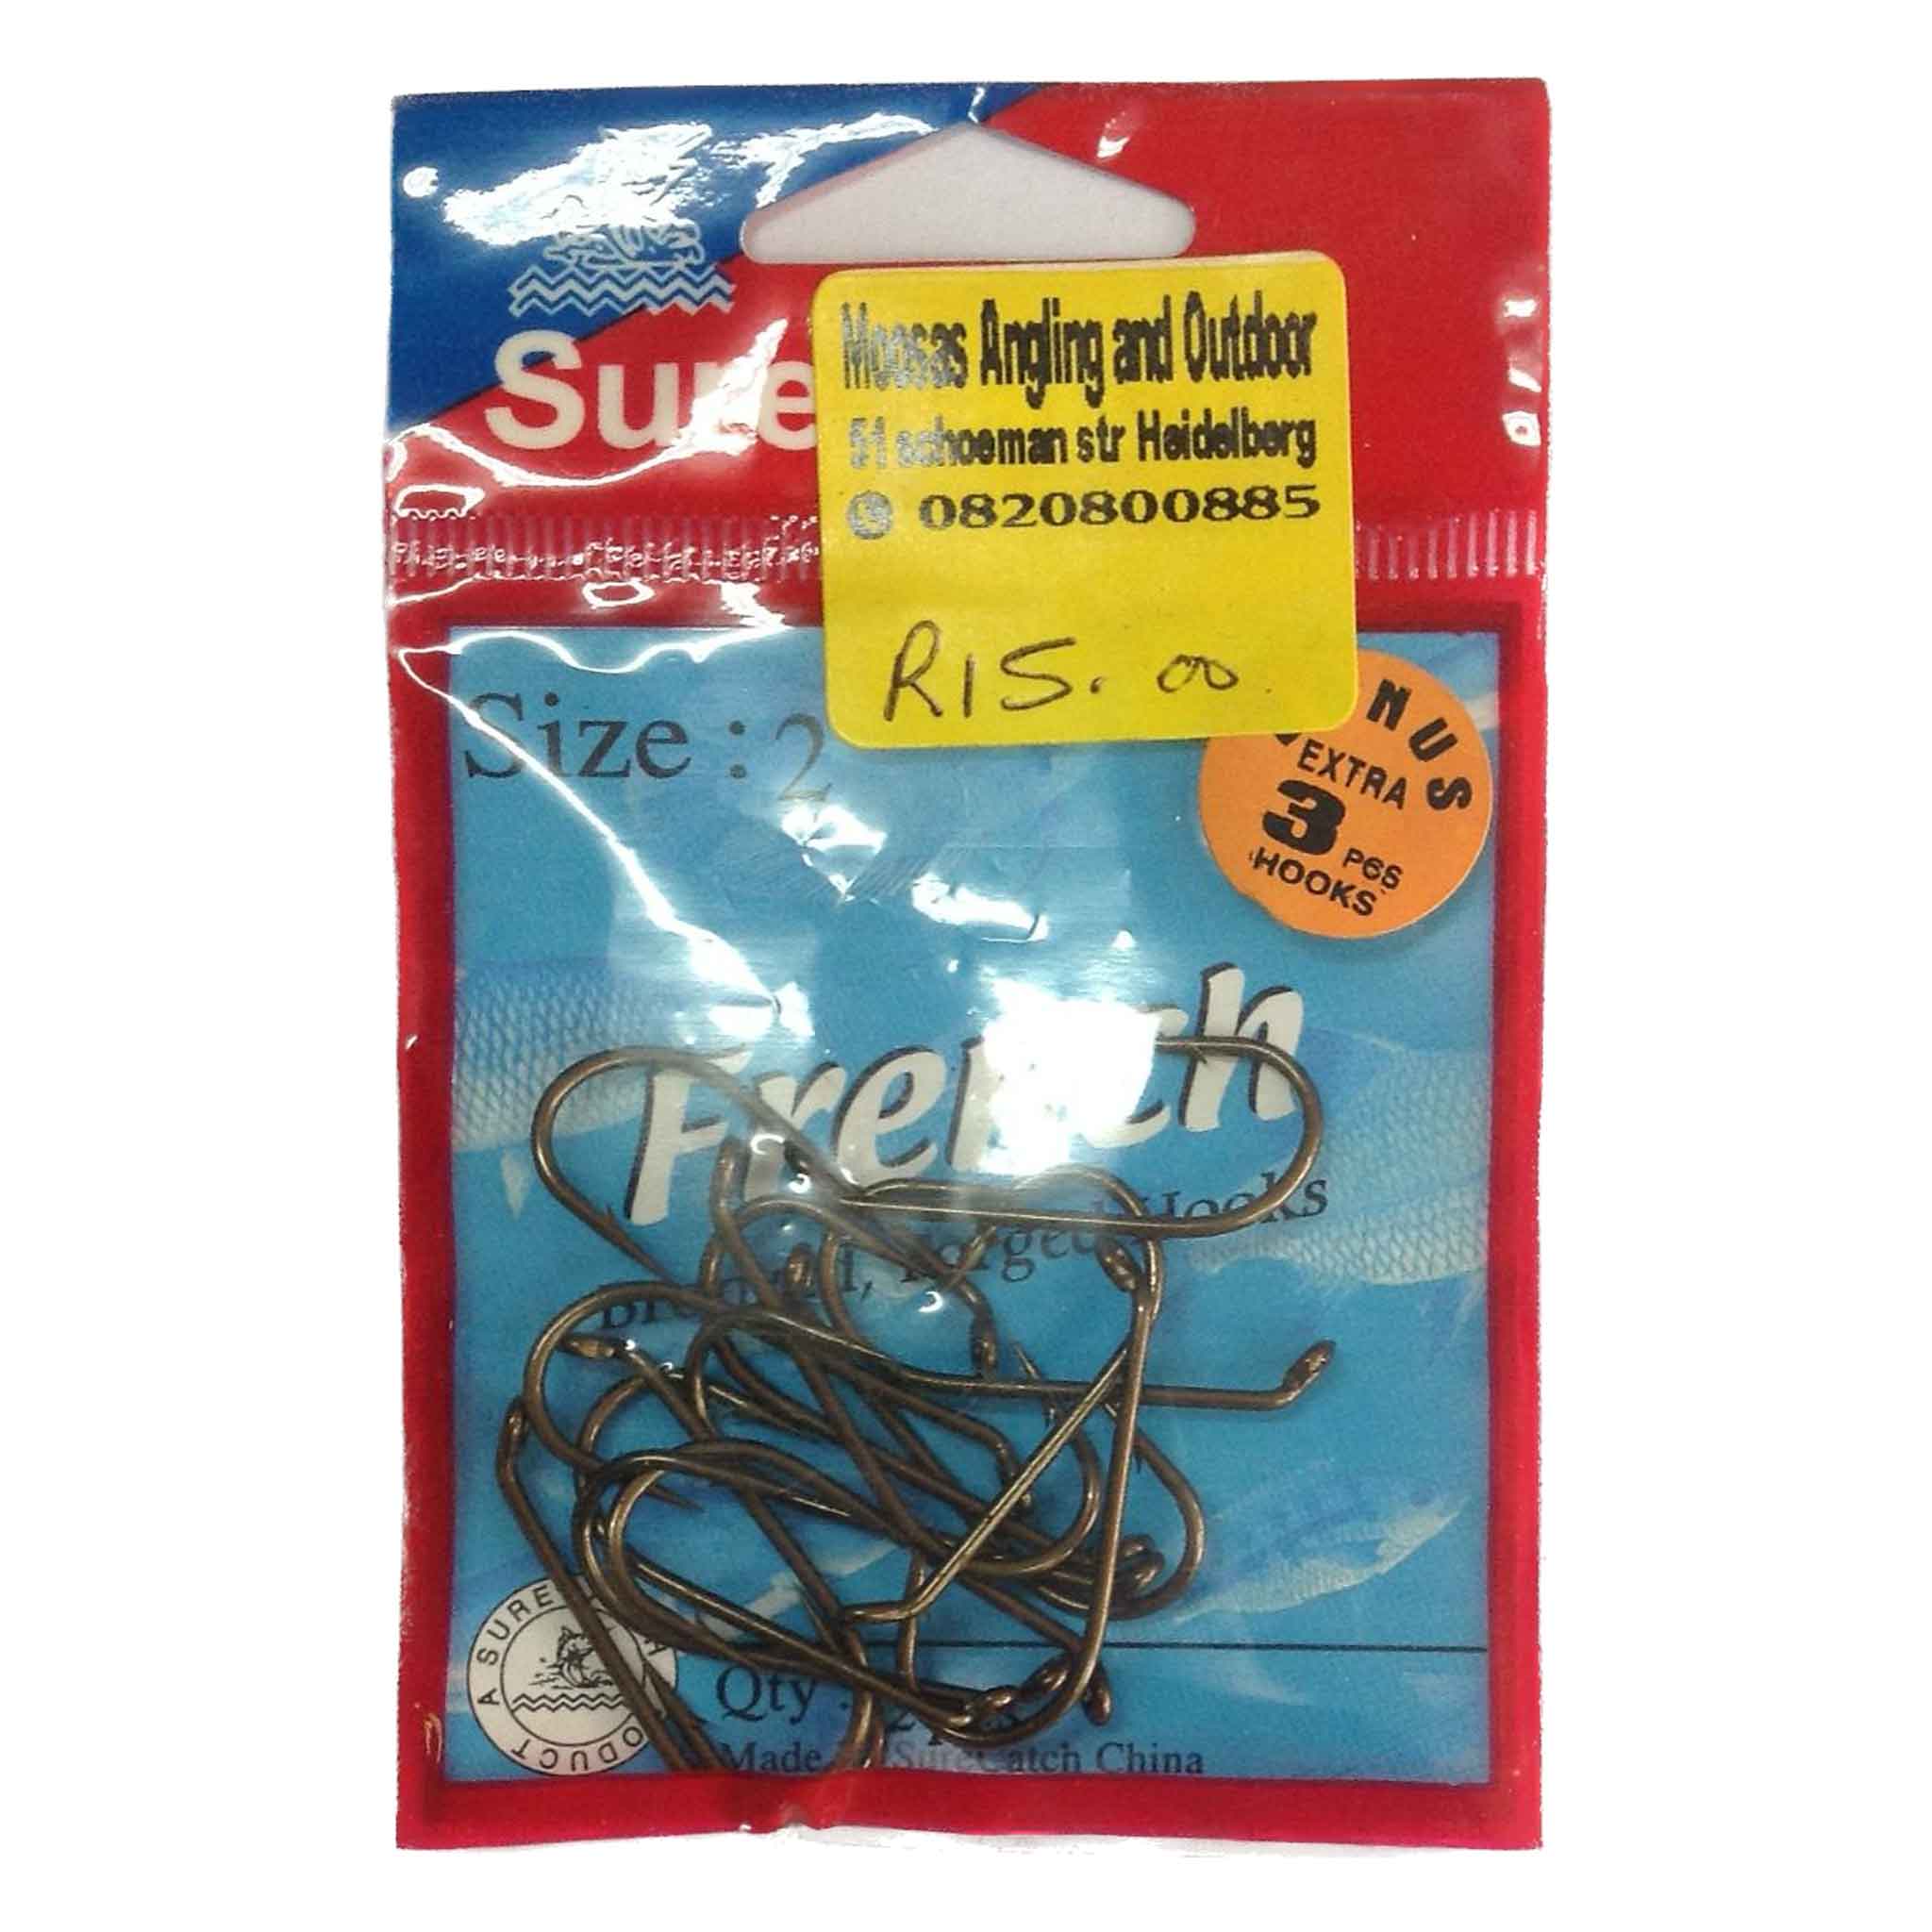 SURE CATCH QUALITY FISH HOOK SIZE 2 MSFULLNAME